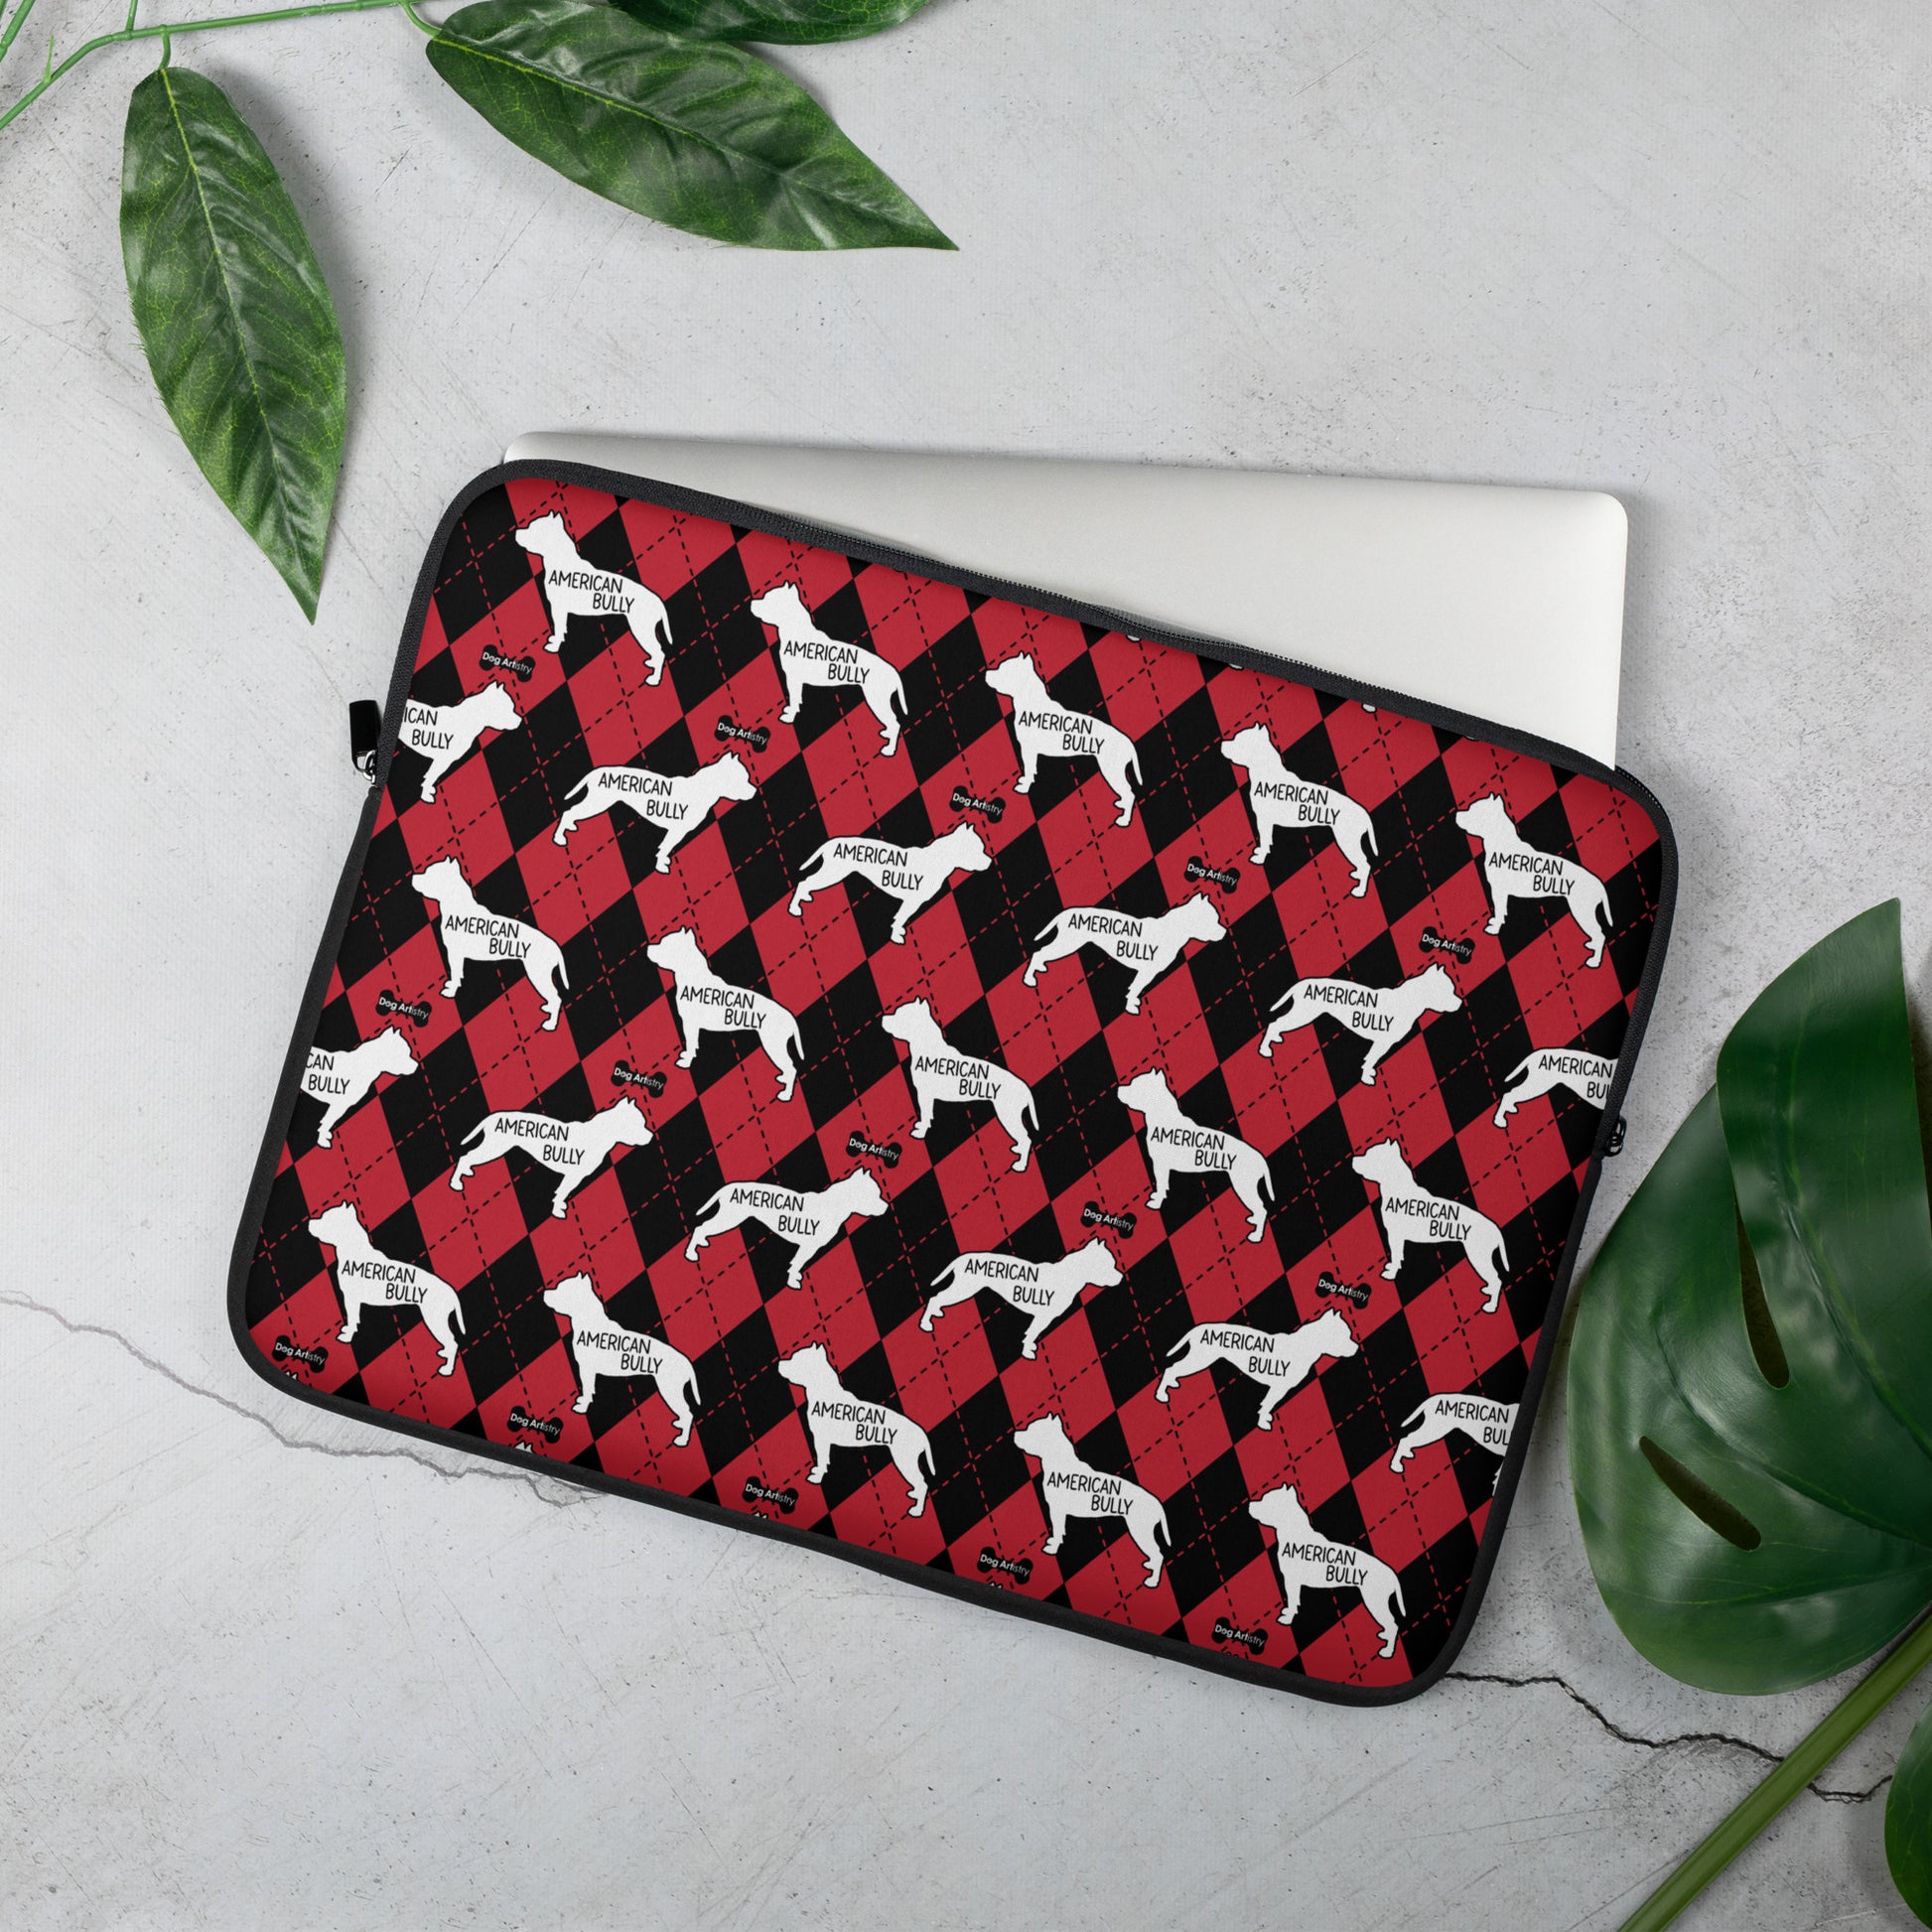 American Bully red and black argyle laptop sleeve by Dog Artistry